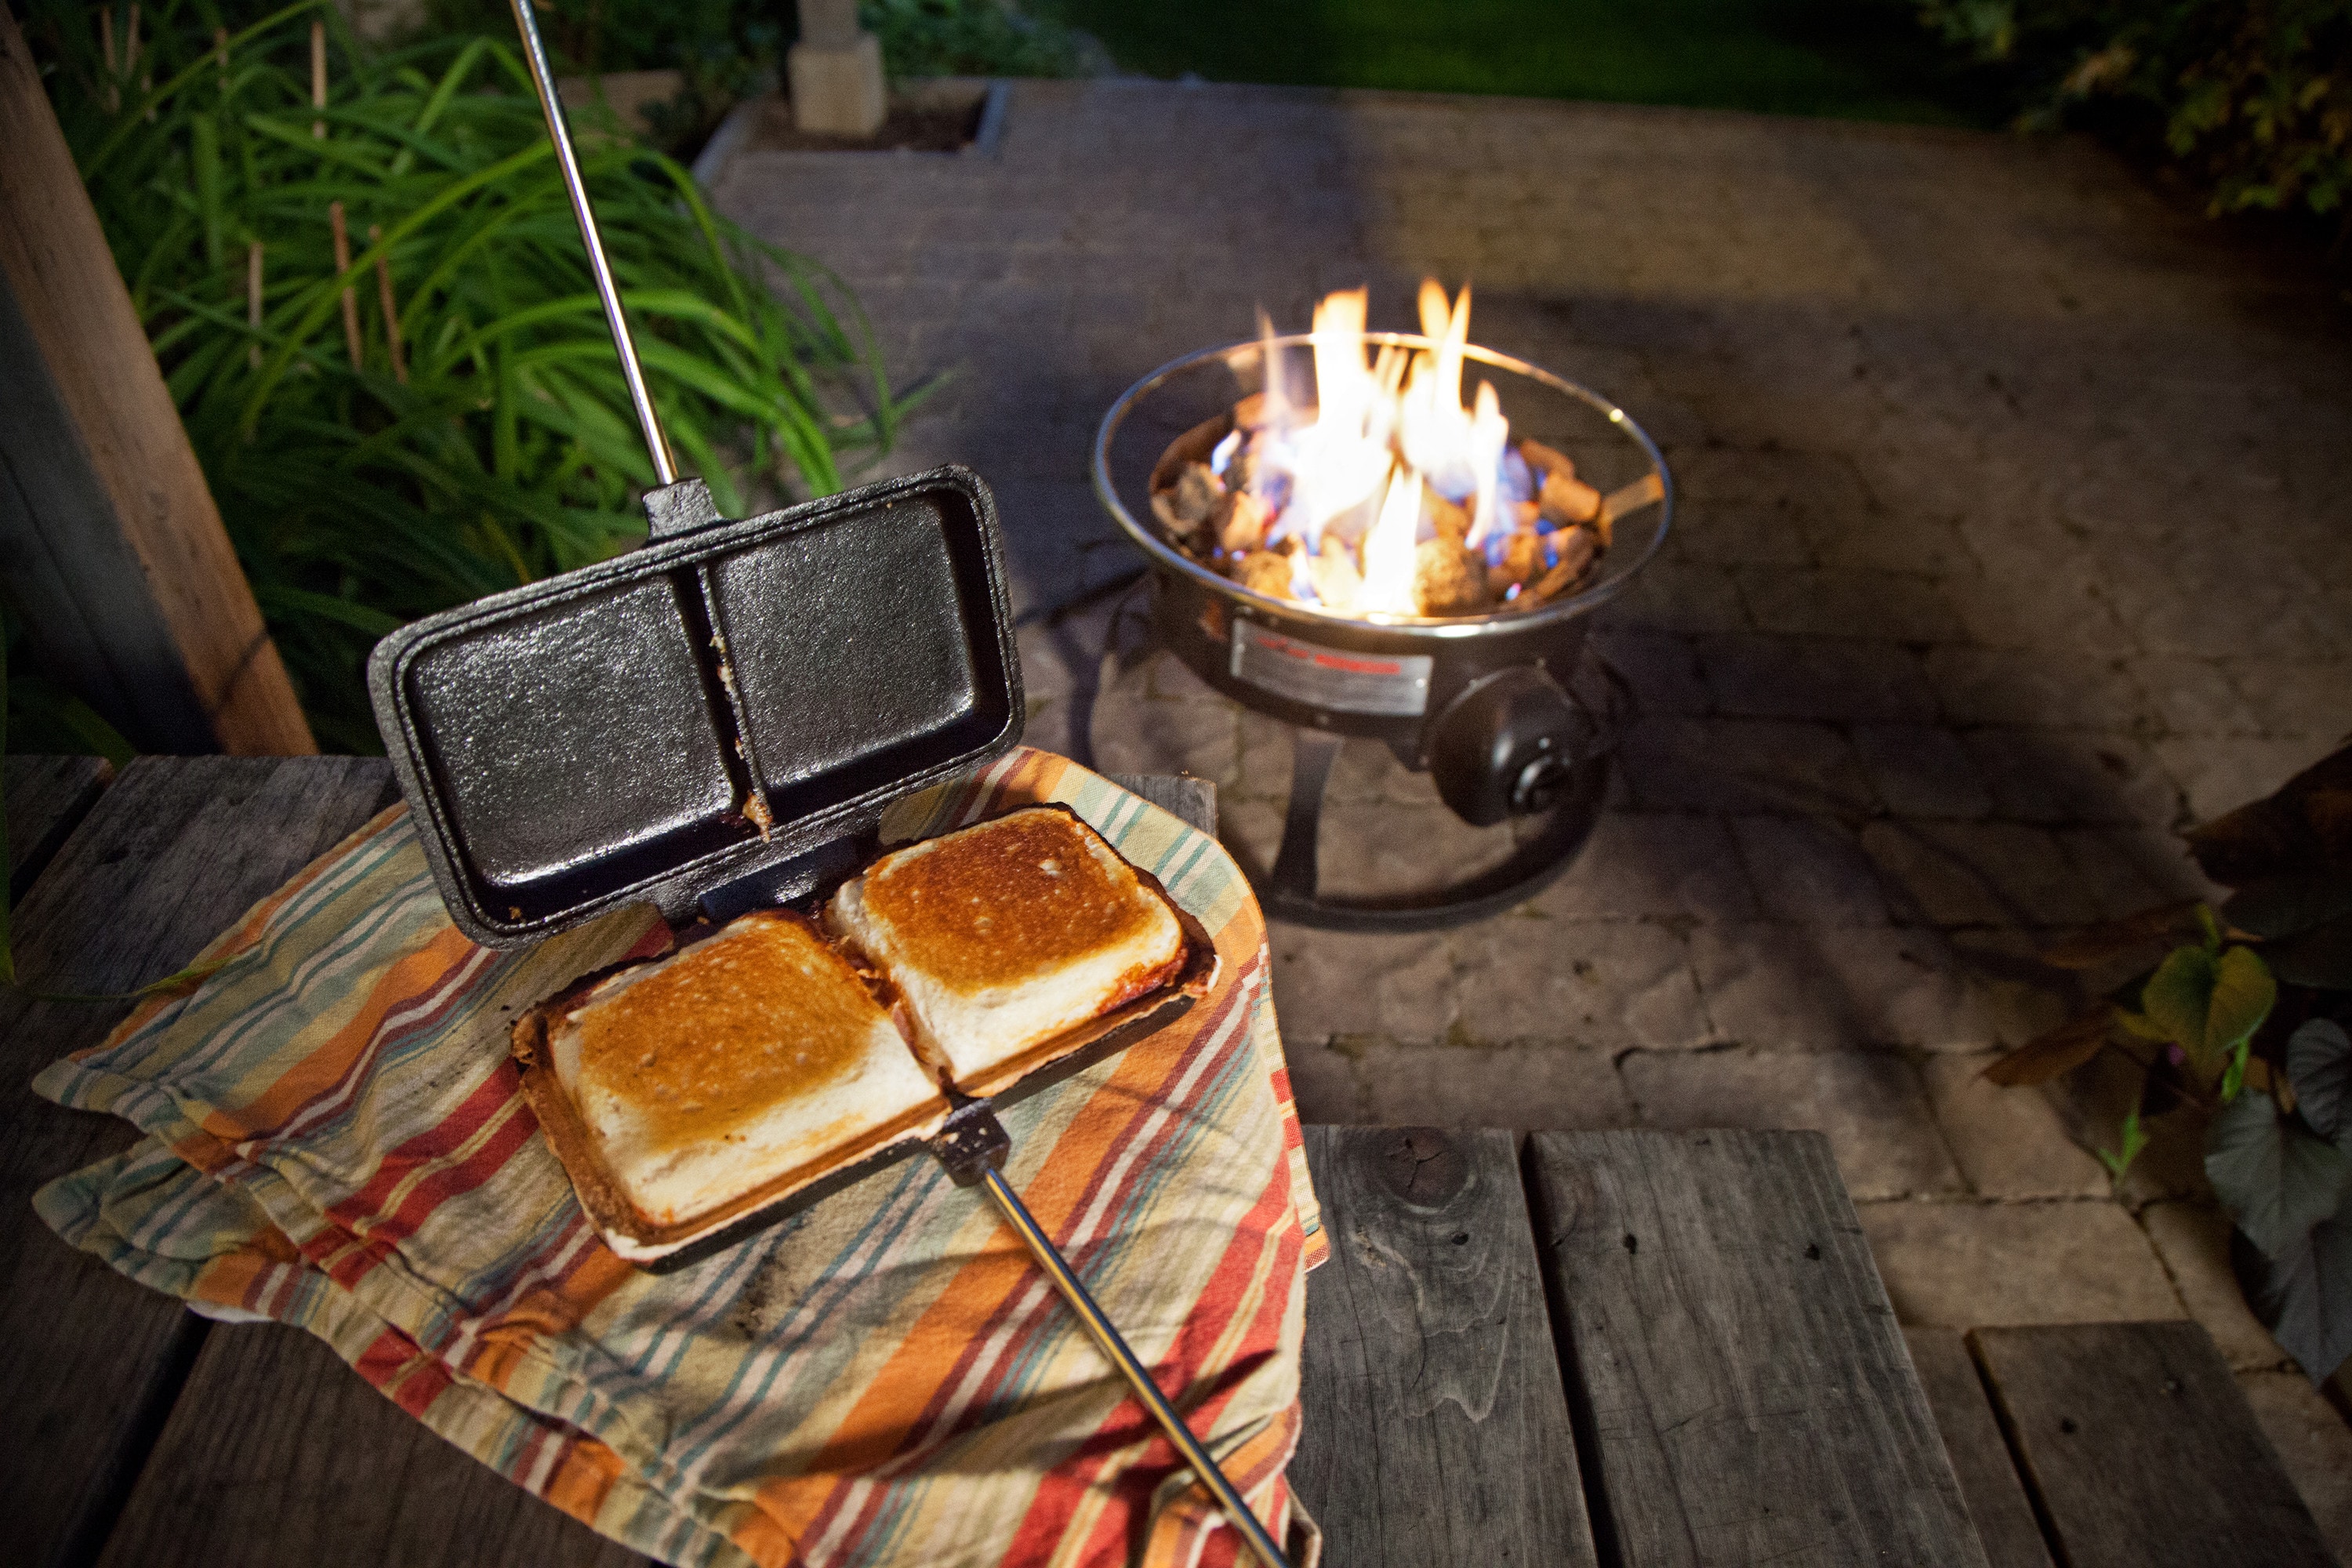 Camp Chef Square Pie Iron: Perfectly Grilled Delights for Outdoor